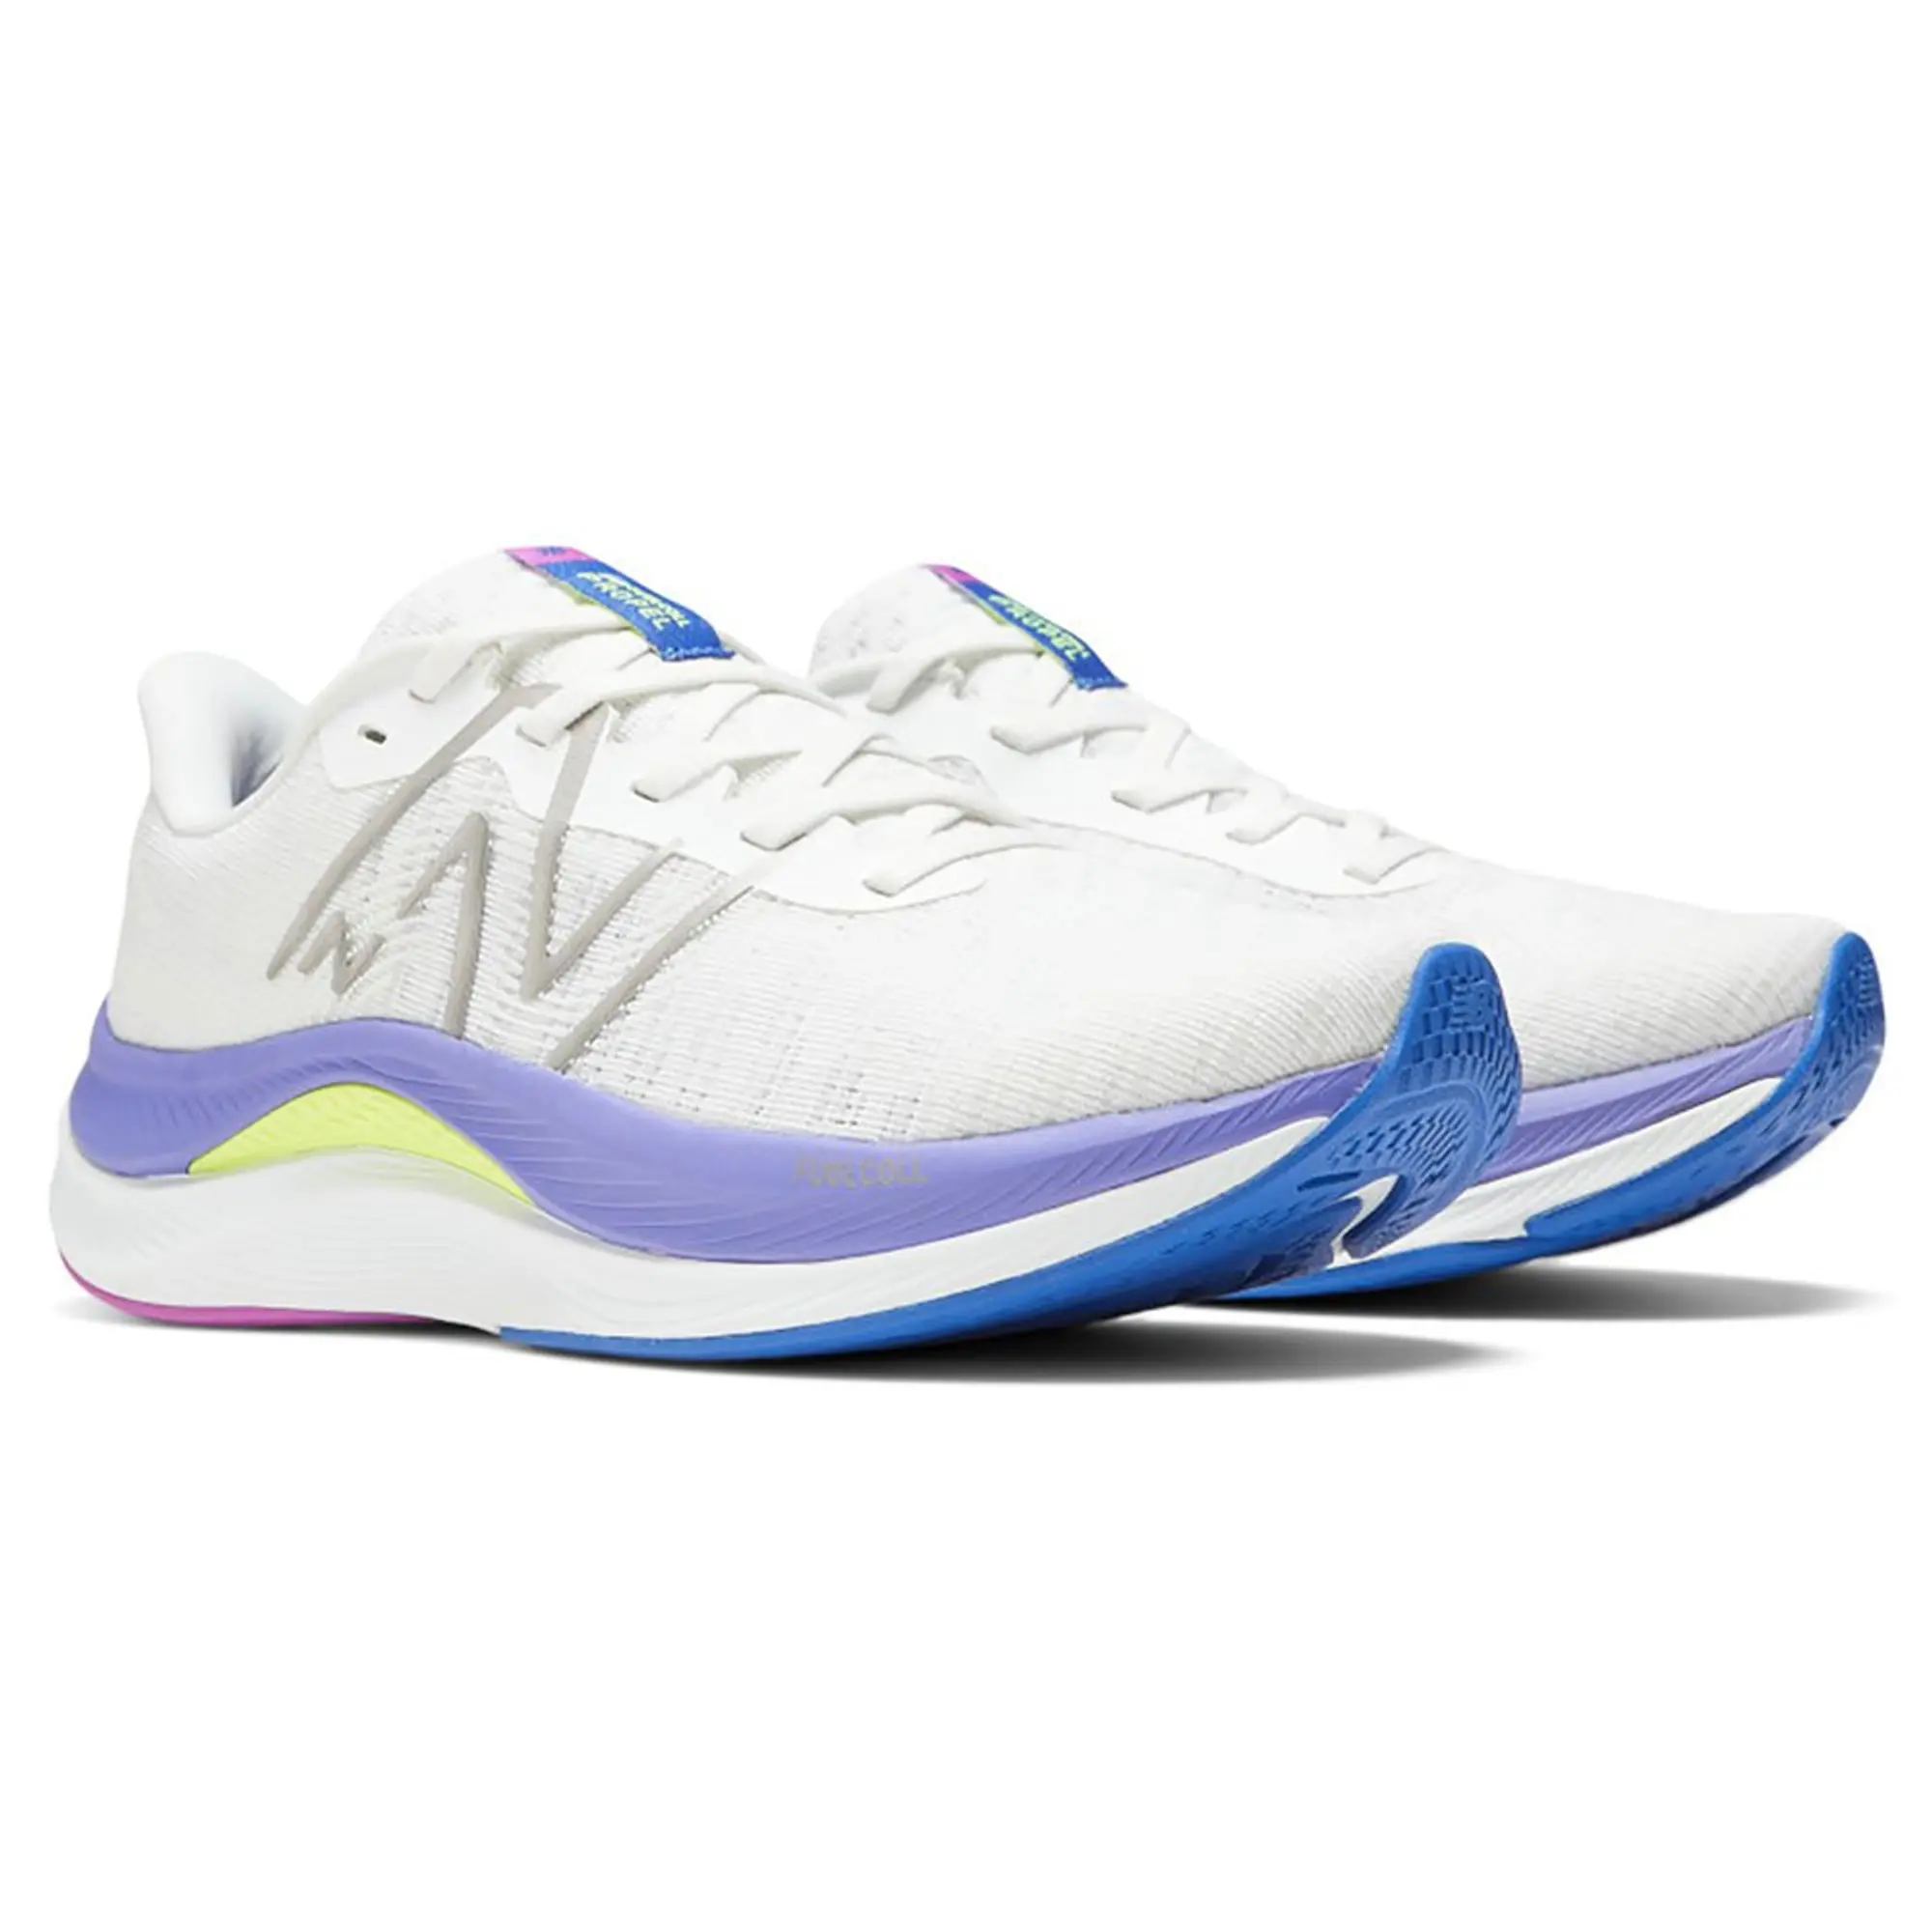 New Balance Fuelcell Propel V4 Running Shoes  - White